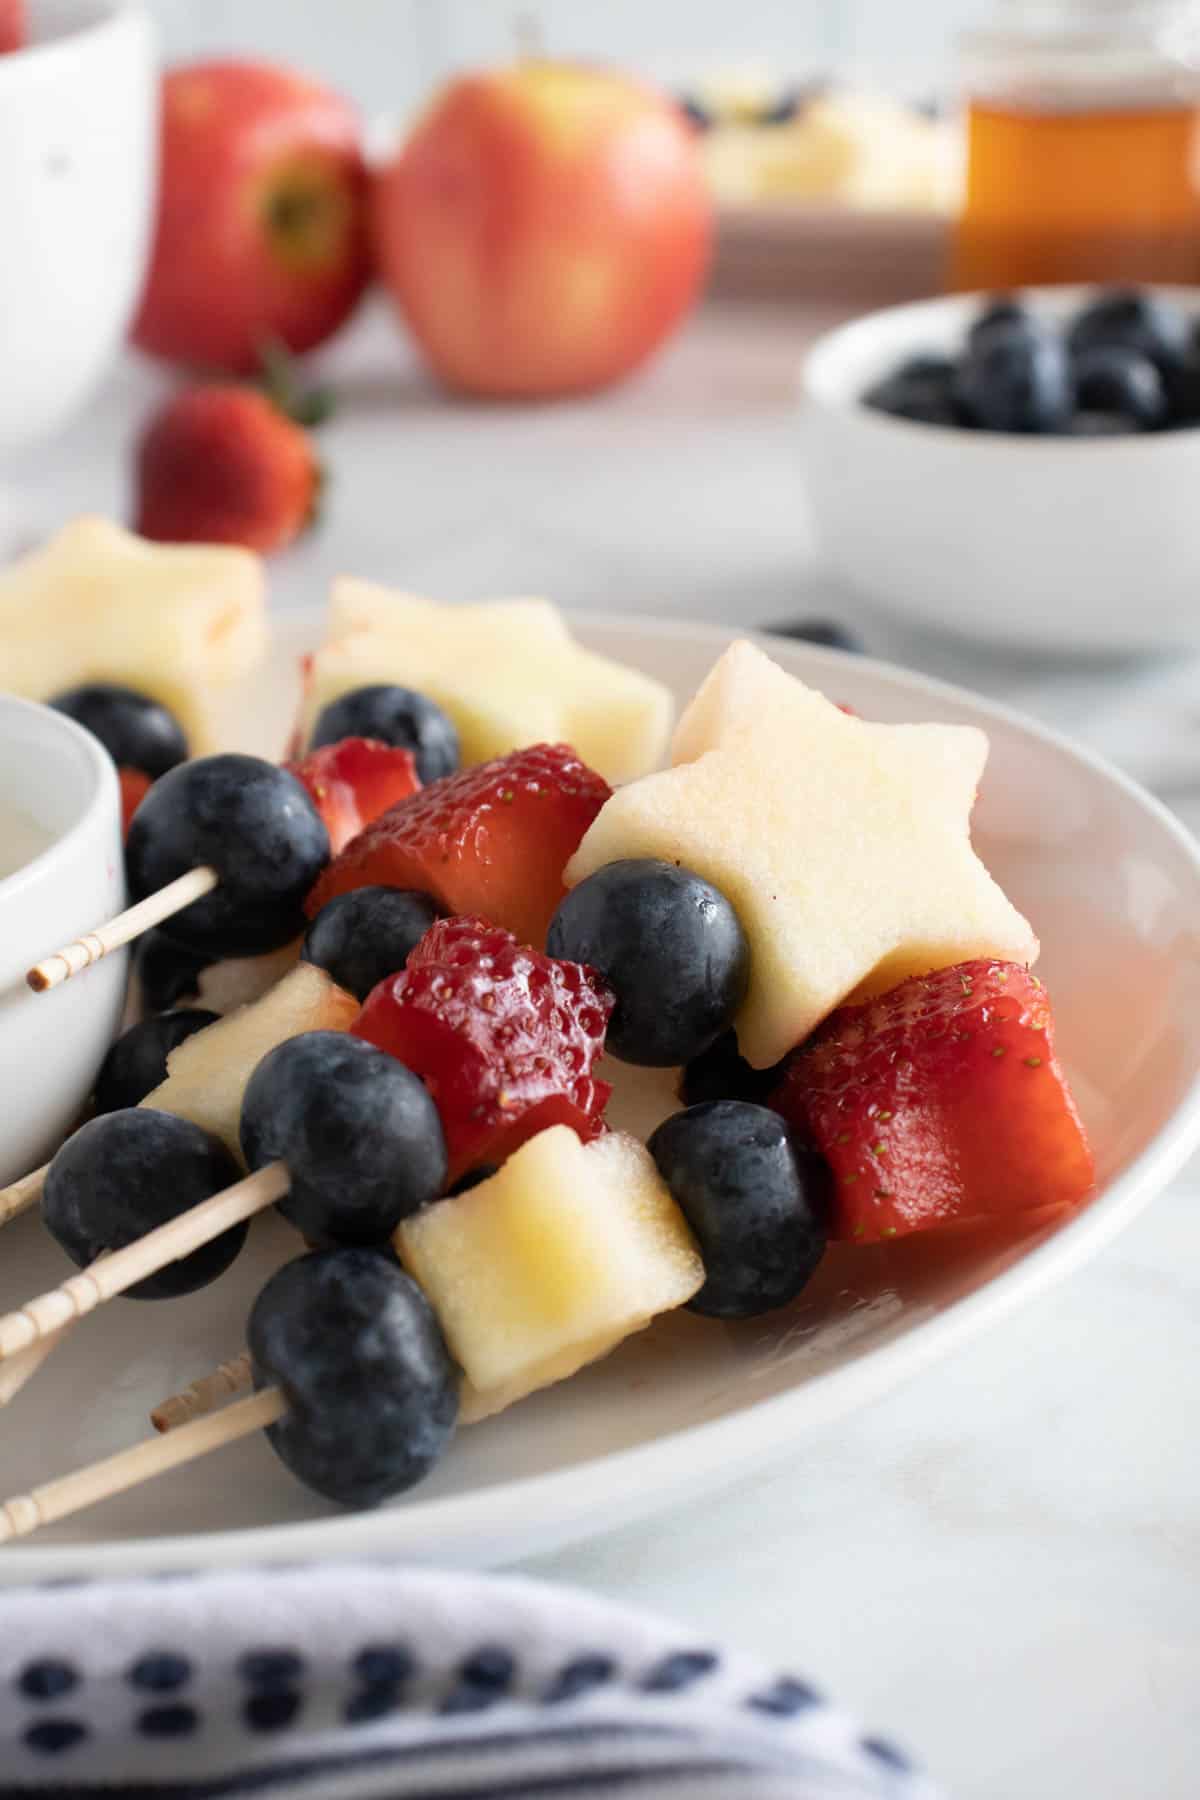 4th of July fruit kabobs made with apples, strawberries, and blueberries.